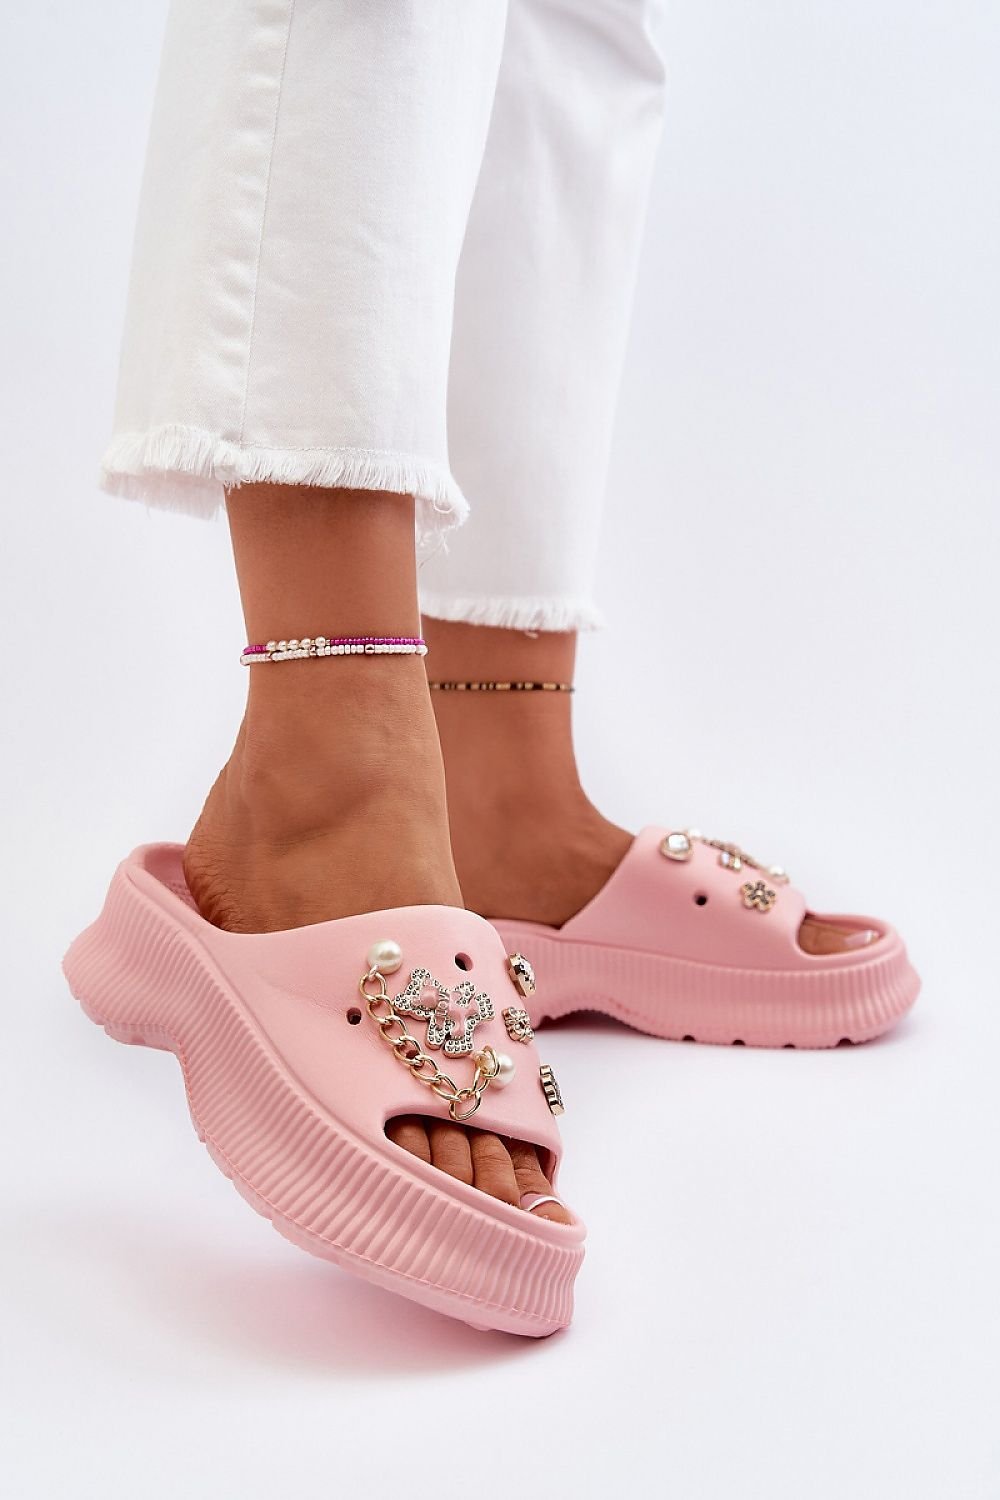 Step in Style Spring Slides: Lightweight Foam Slides with Charming Accents